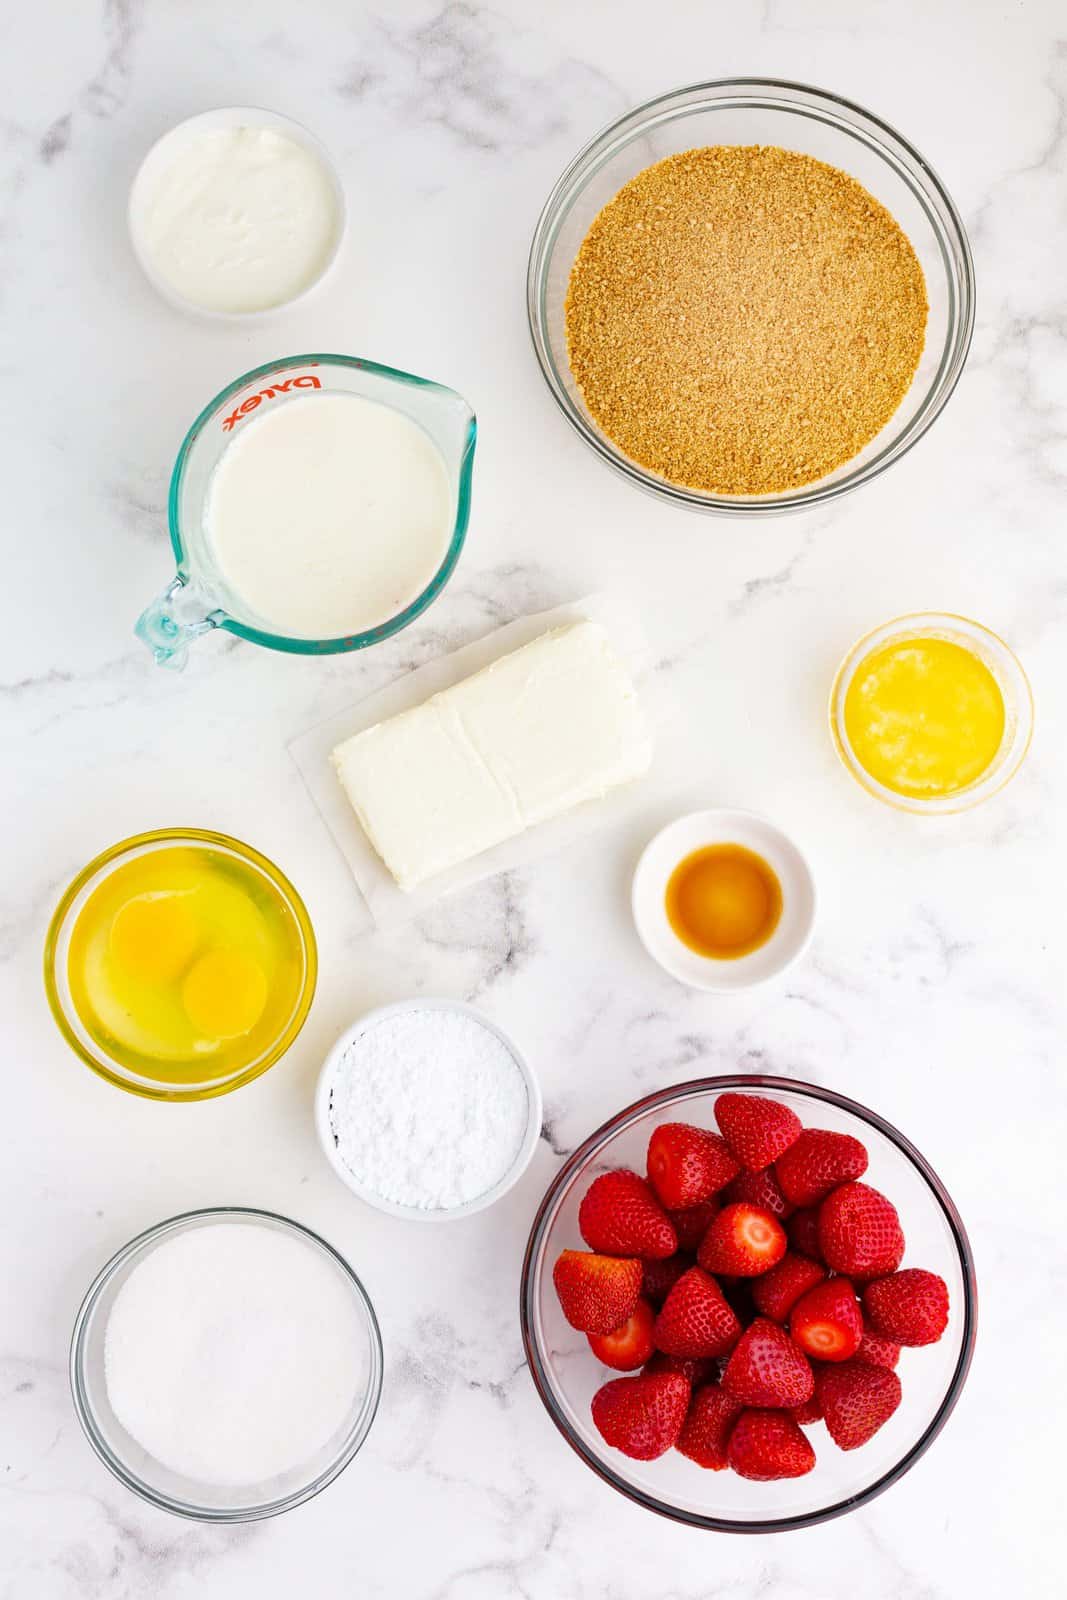 Ingredients needed: graham cracker crumbs, salted butter, cream cheese, granulated sugar, eggs, sour cream, vanilla extract, heavy whipping cream, powdered sugar and strawberries.